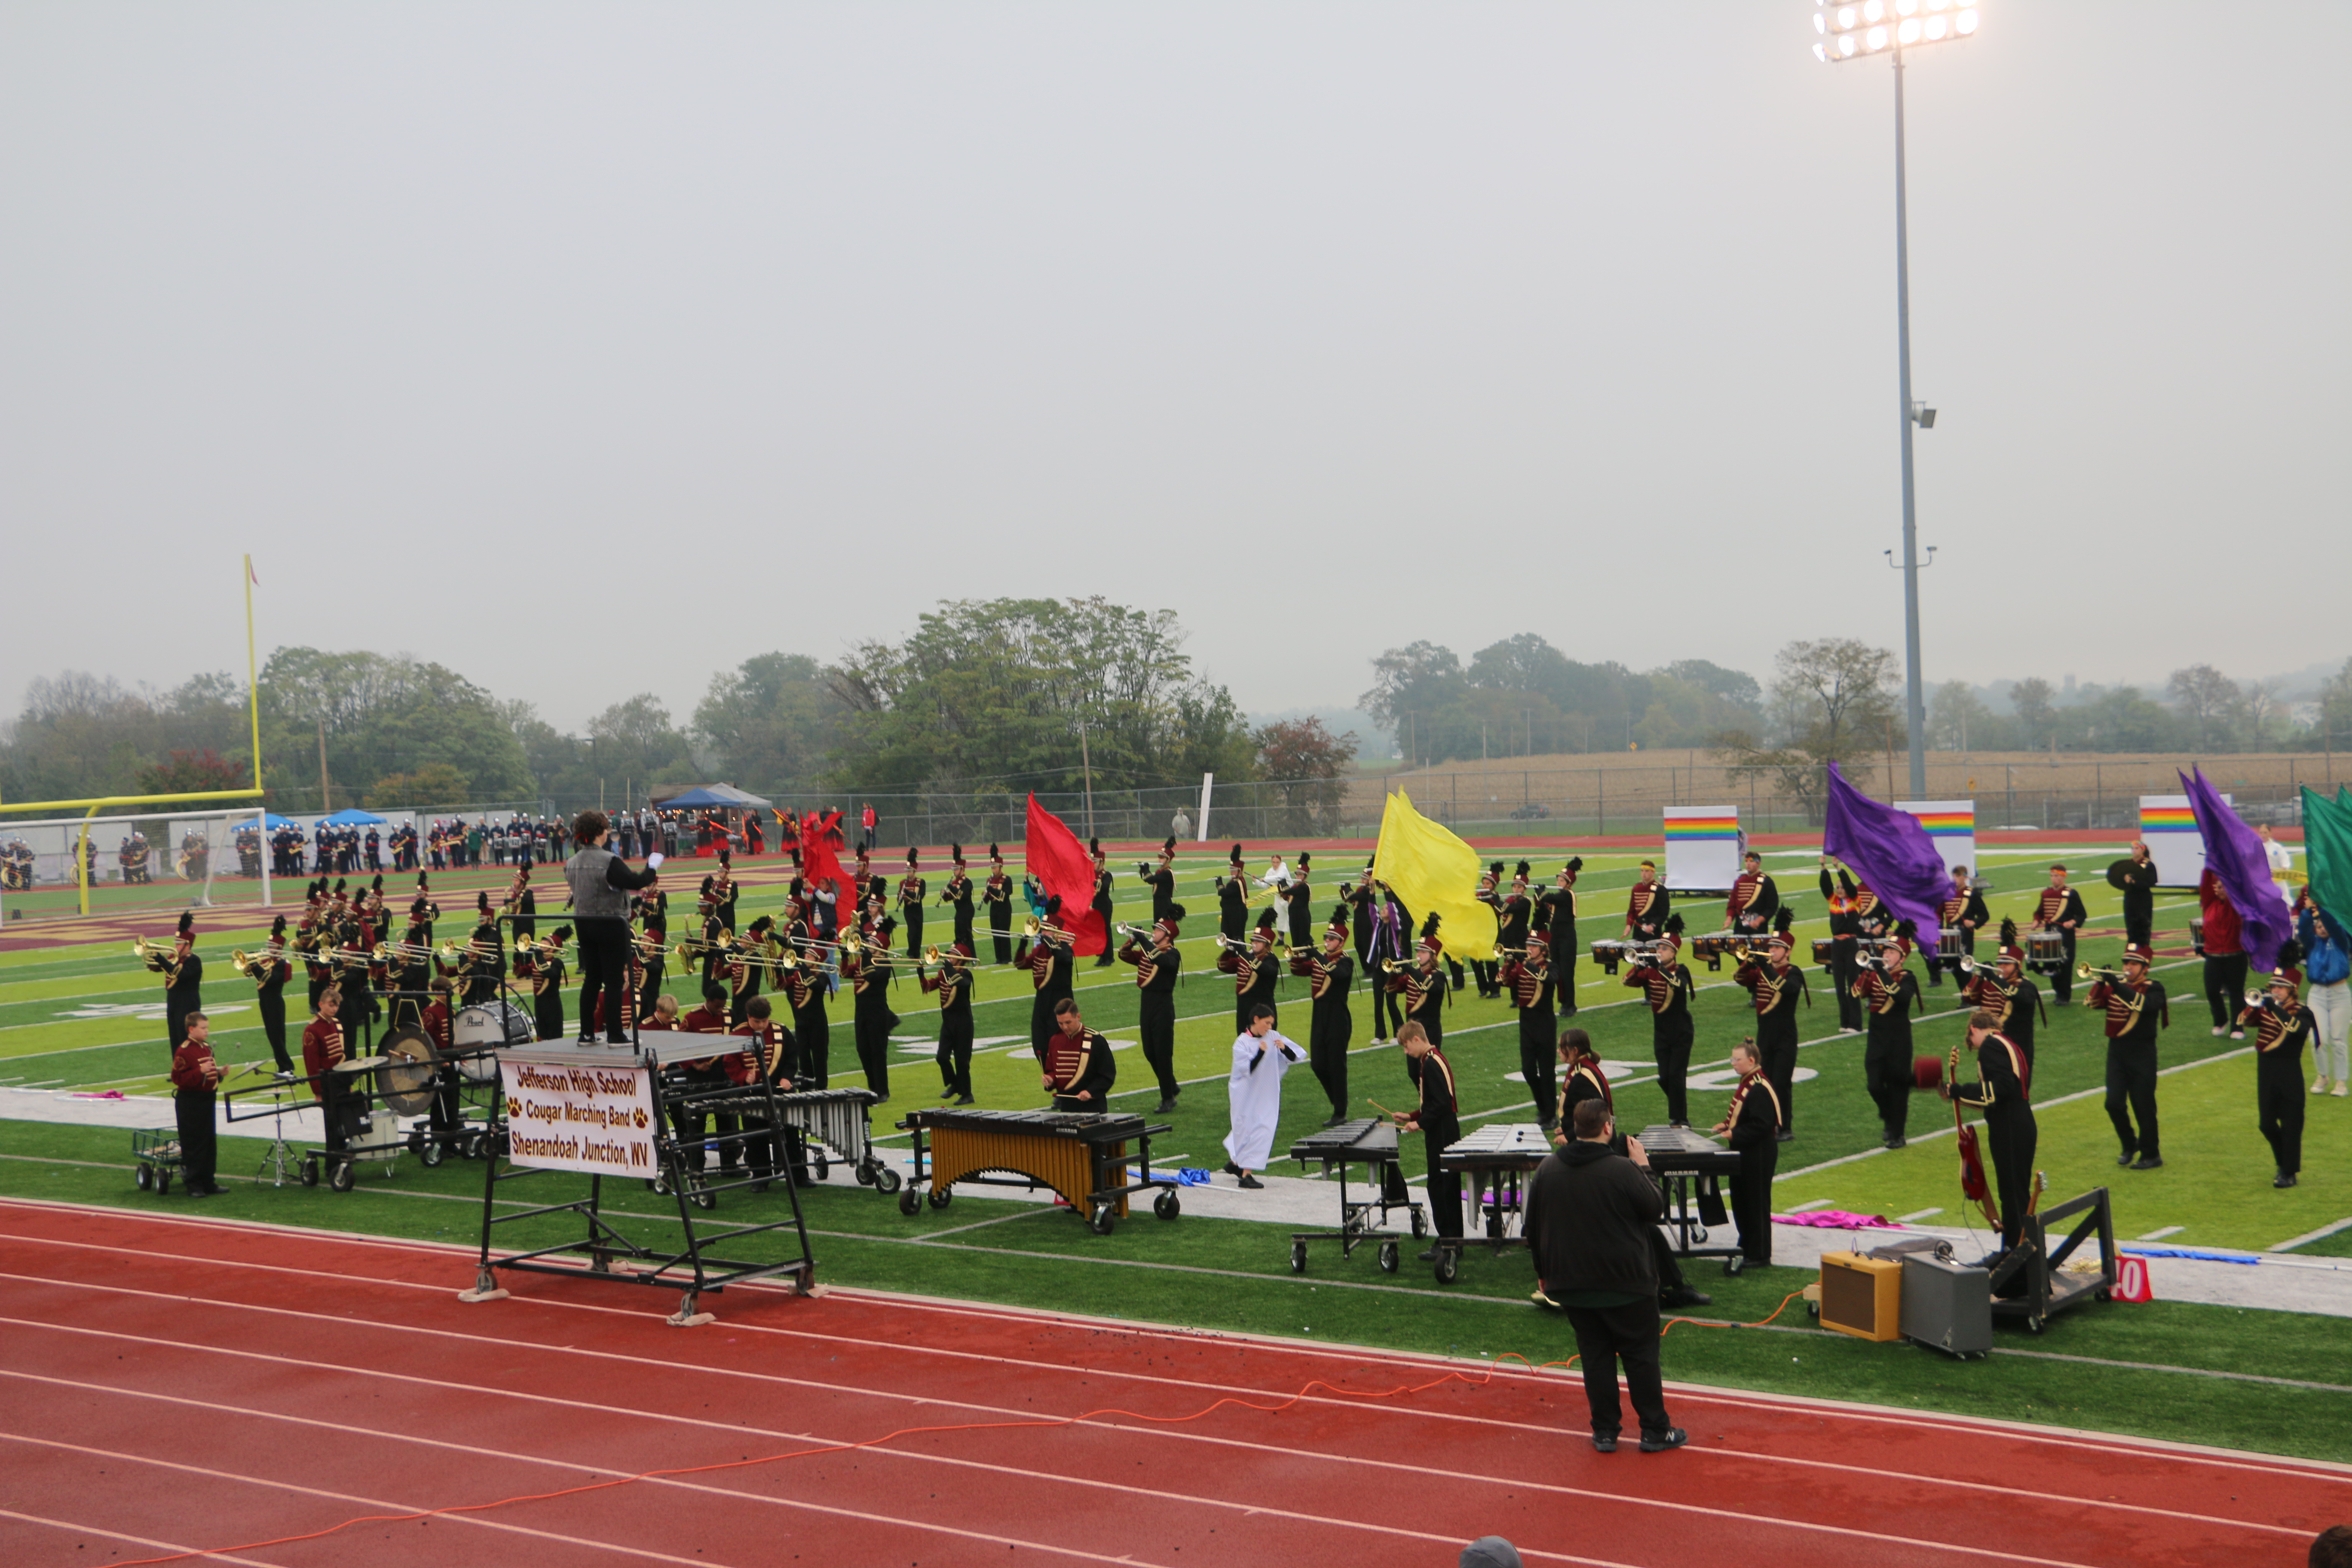 Band on the field